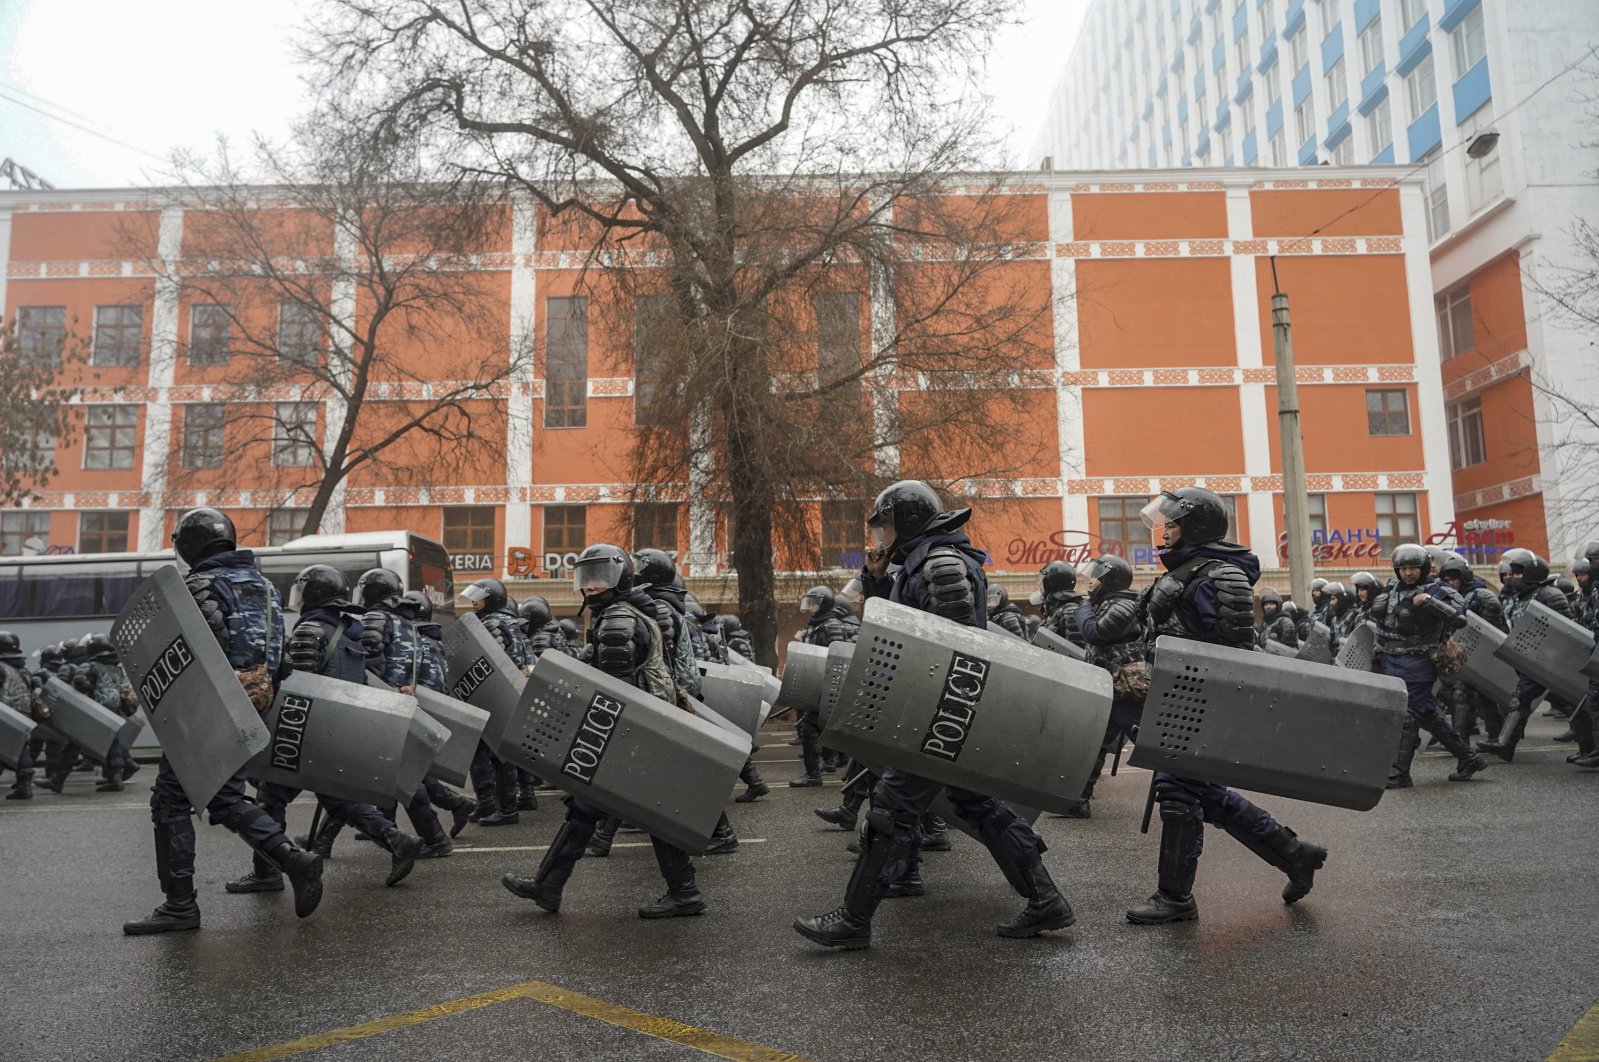 Kazakh policemen during protests over a hike in energy prices in Almaty, Kazakhstan, Jan. 5, 2022 (EPA File Photo)